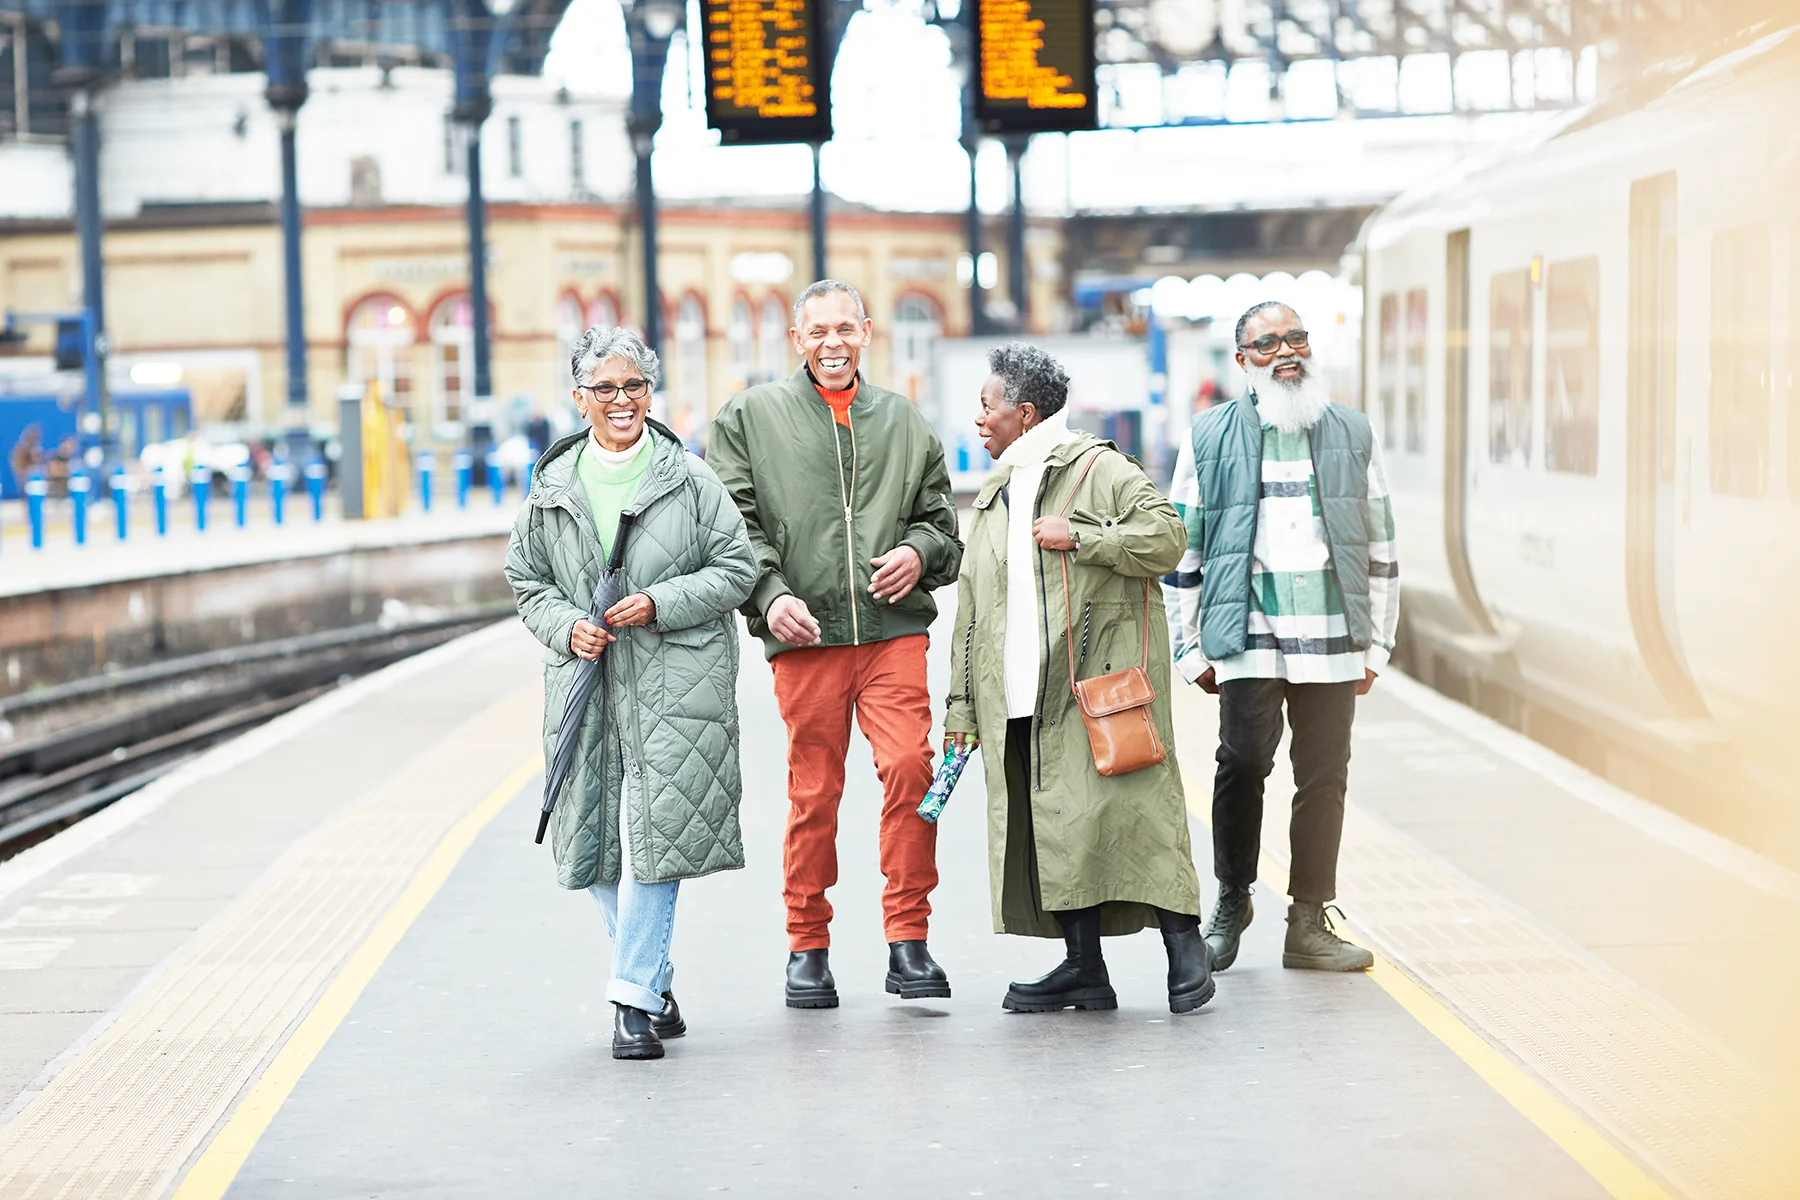 2 senior Black men and 2 senior Black women standing laughing on a station platform with a train on the tracks next to them.